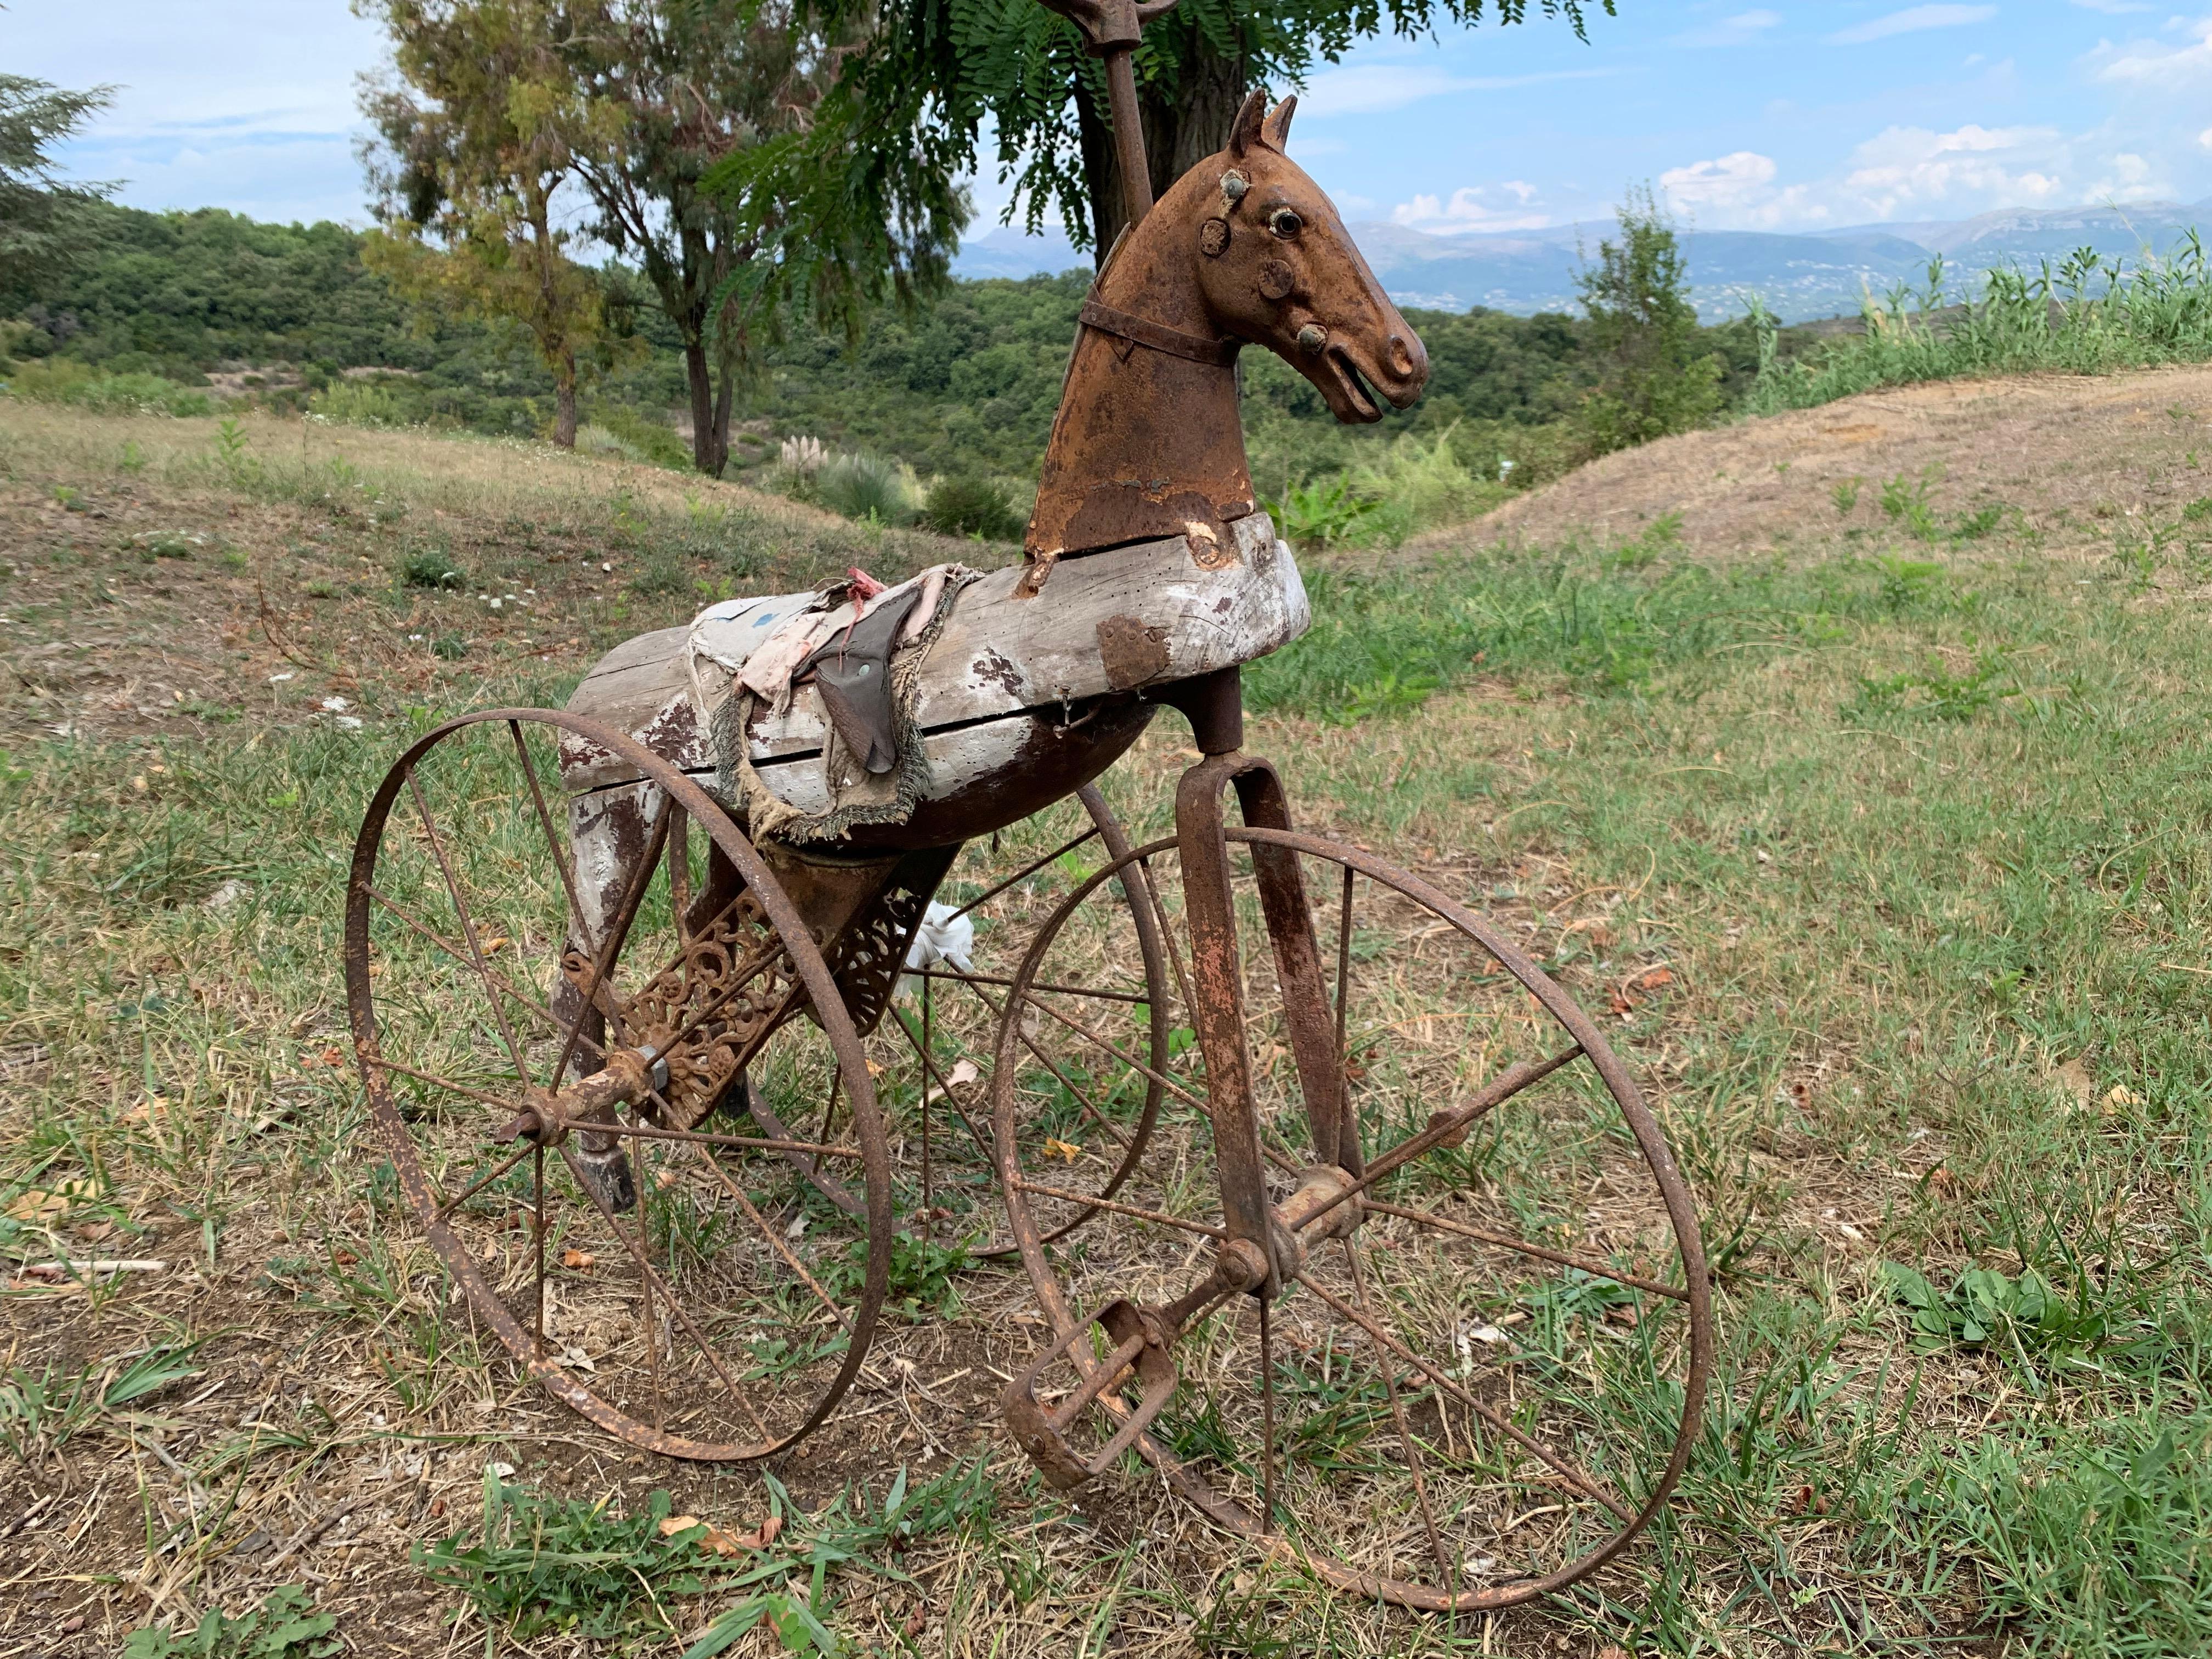 This quite amazing children's tricycle has seen it's best days along time ago, however it has retained all it's charm and magic.
The face, the handles and the wheels are made out of rusty metal. The body is carved out of wood, still covered with